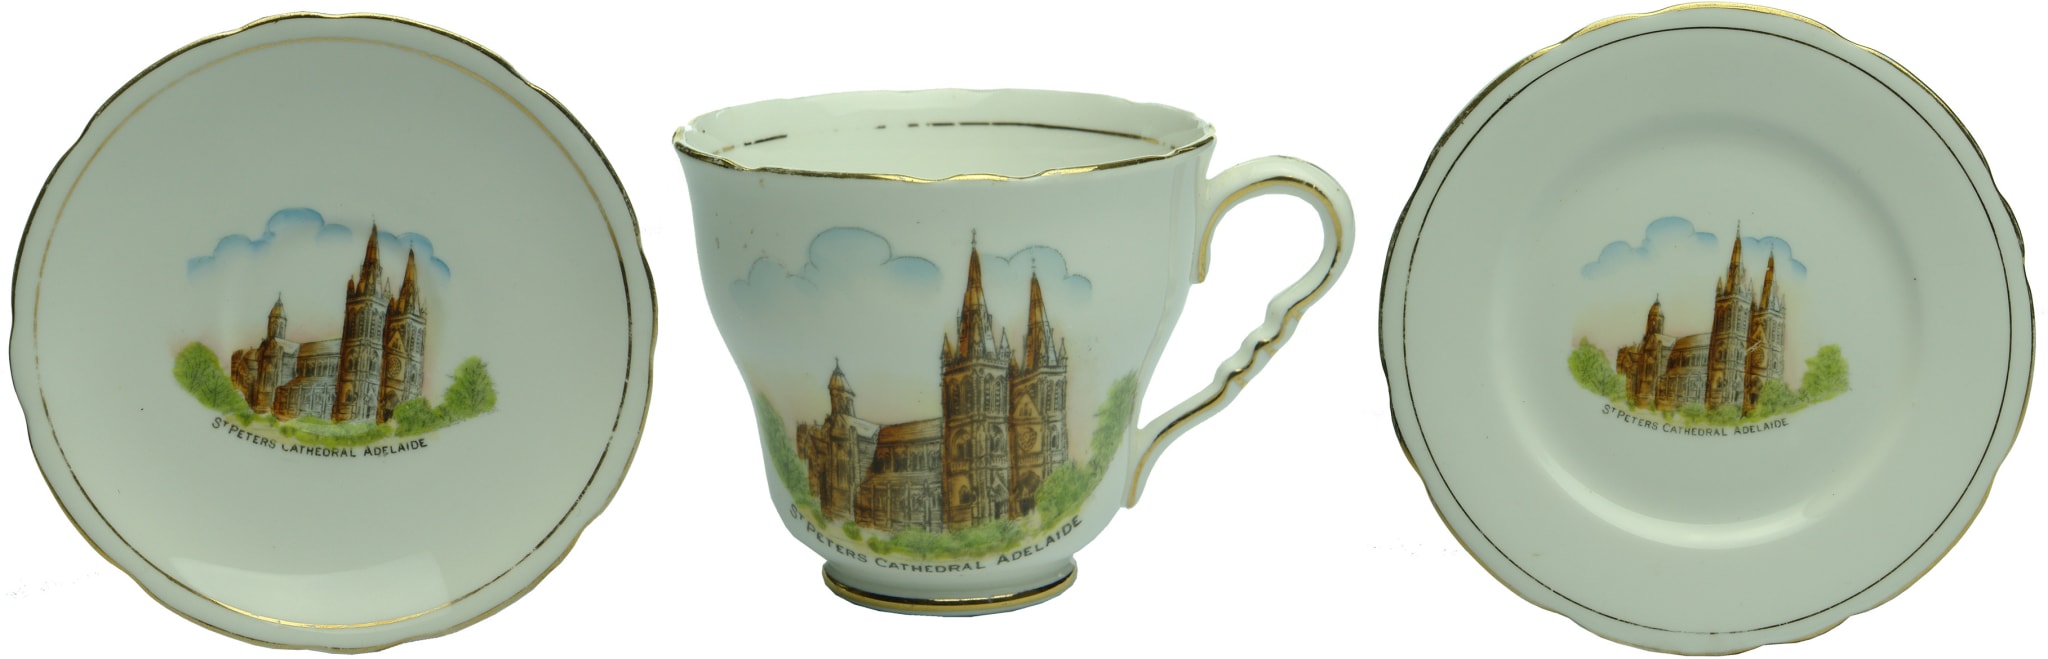 Trio St Peters Cathedral Adelaide Souvenir Ware Cup Plates